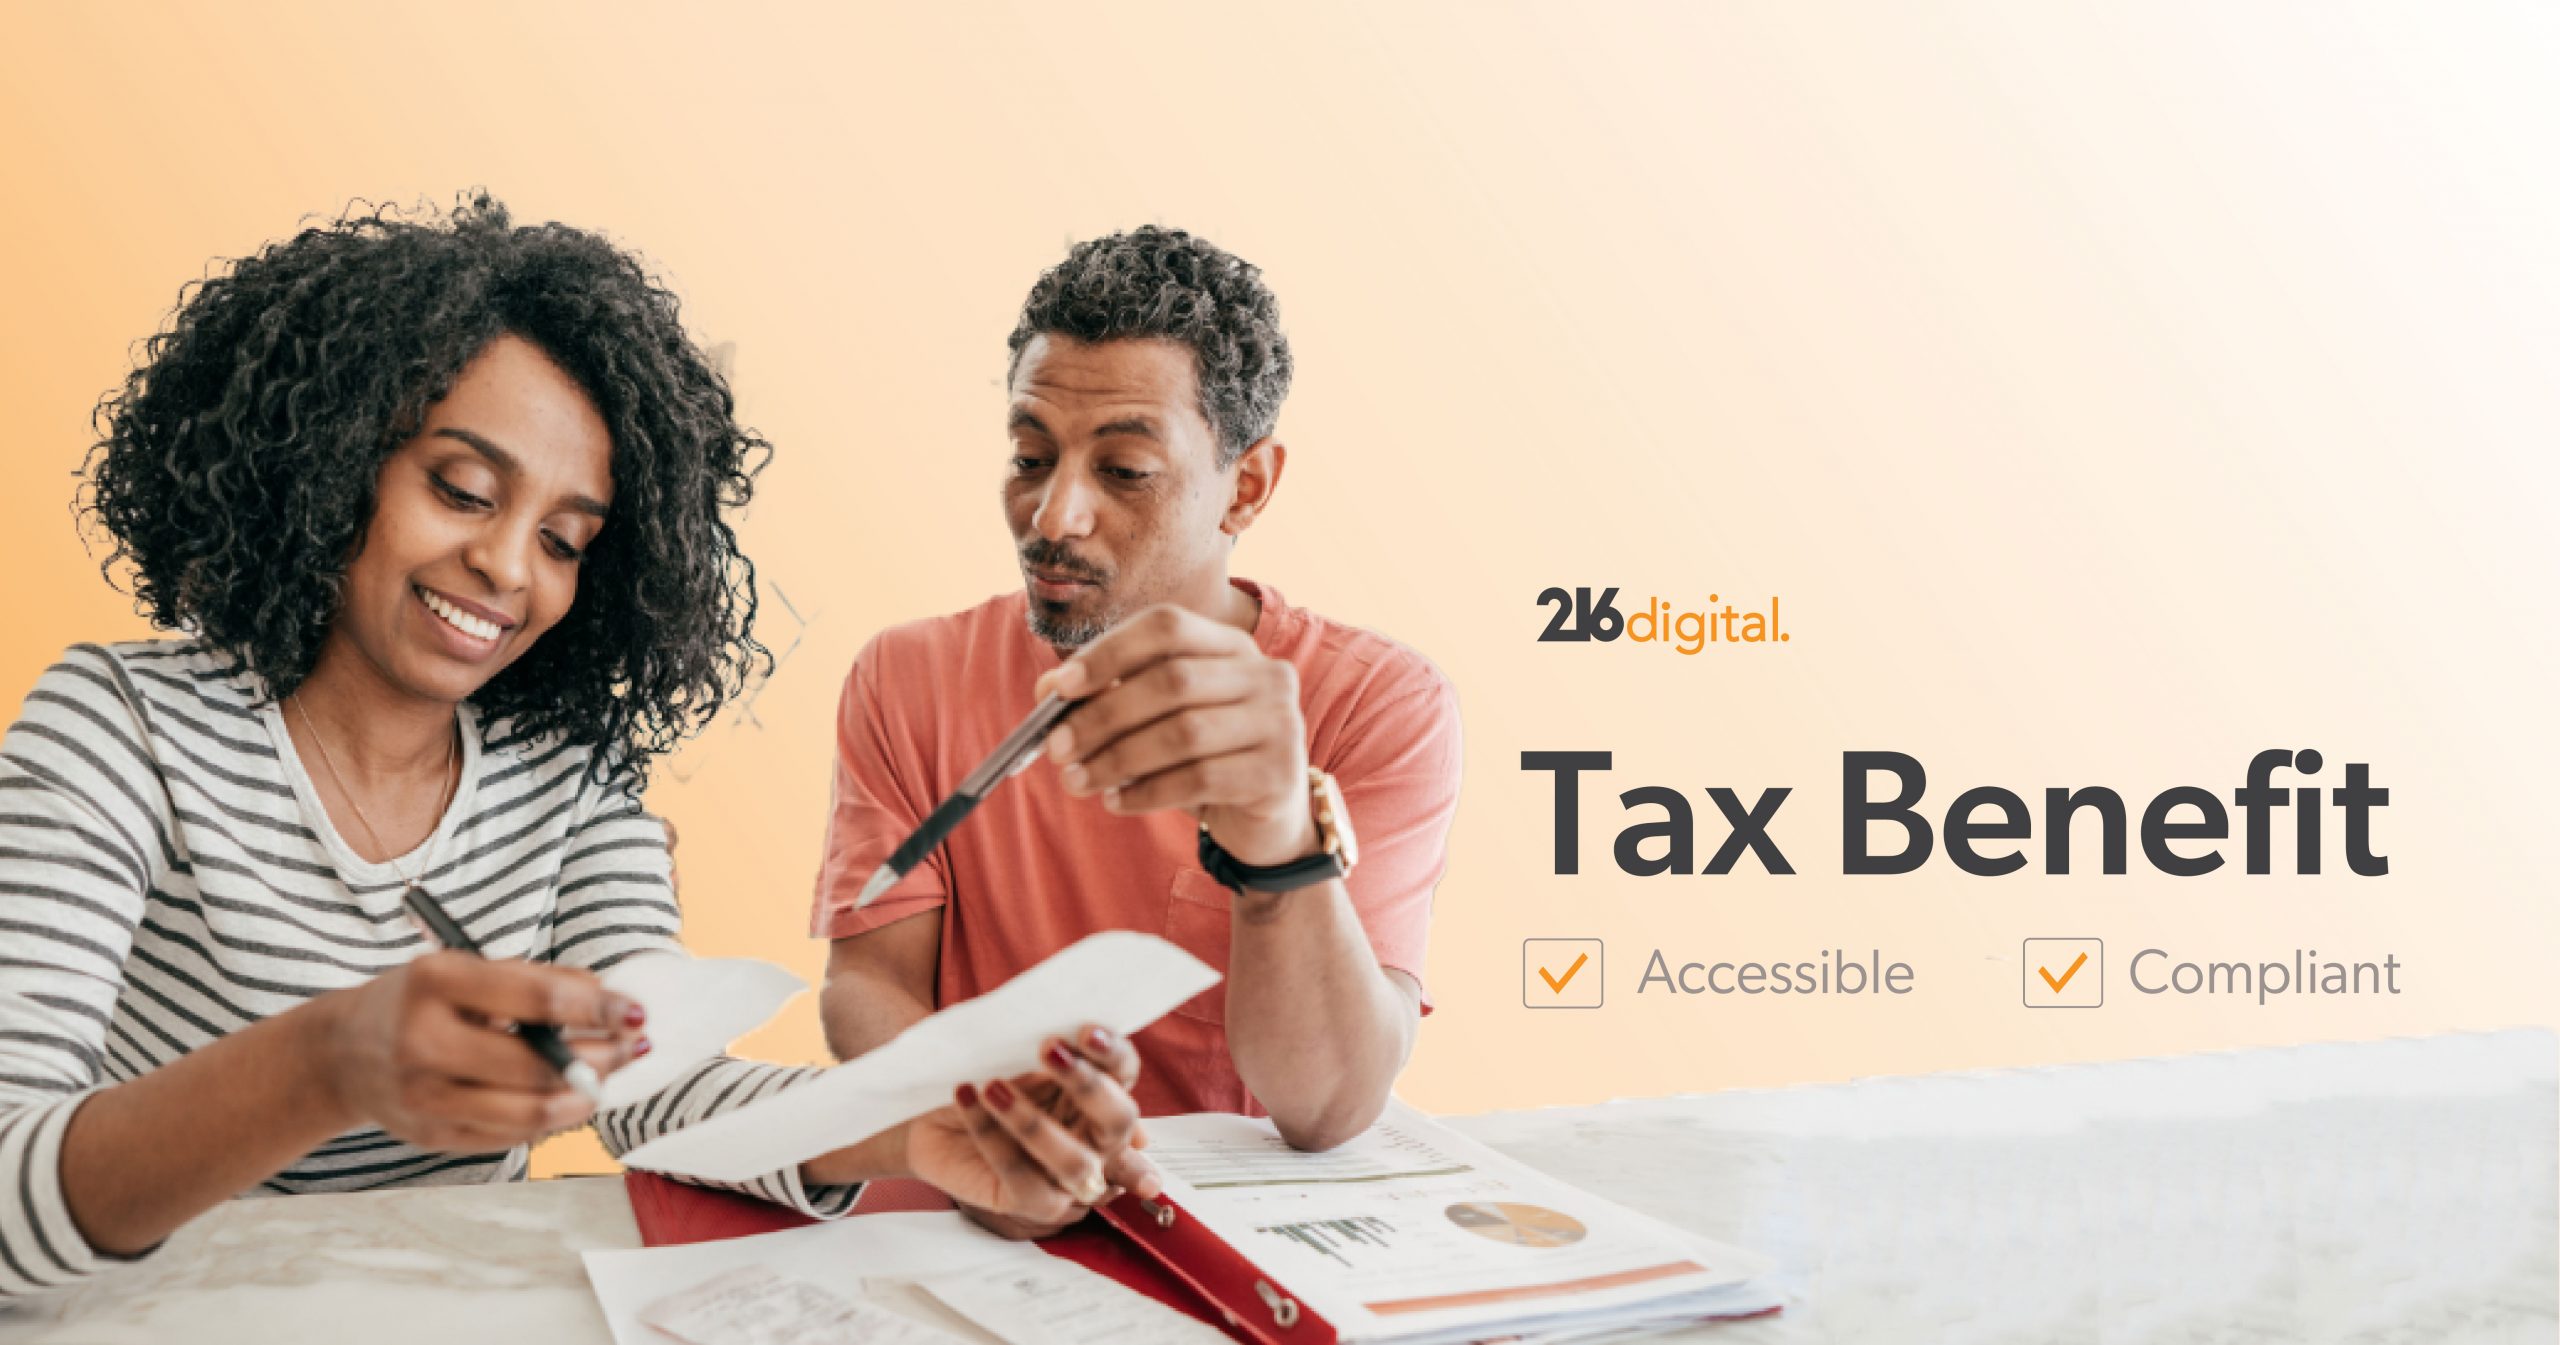 Web Accessibility & the Disabled Access Tax Credit: Who Qualifies, and Key Stipulations